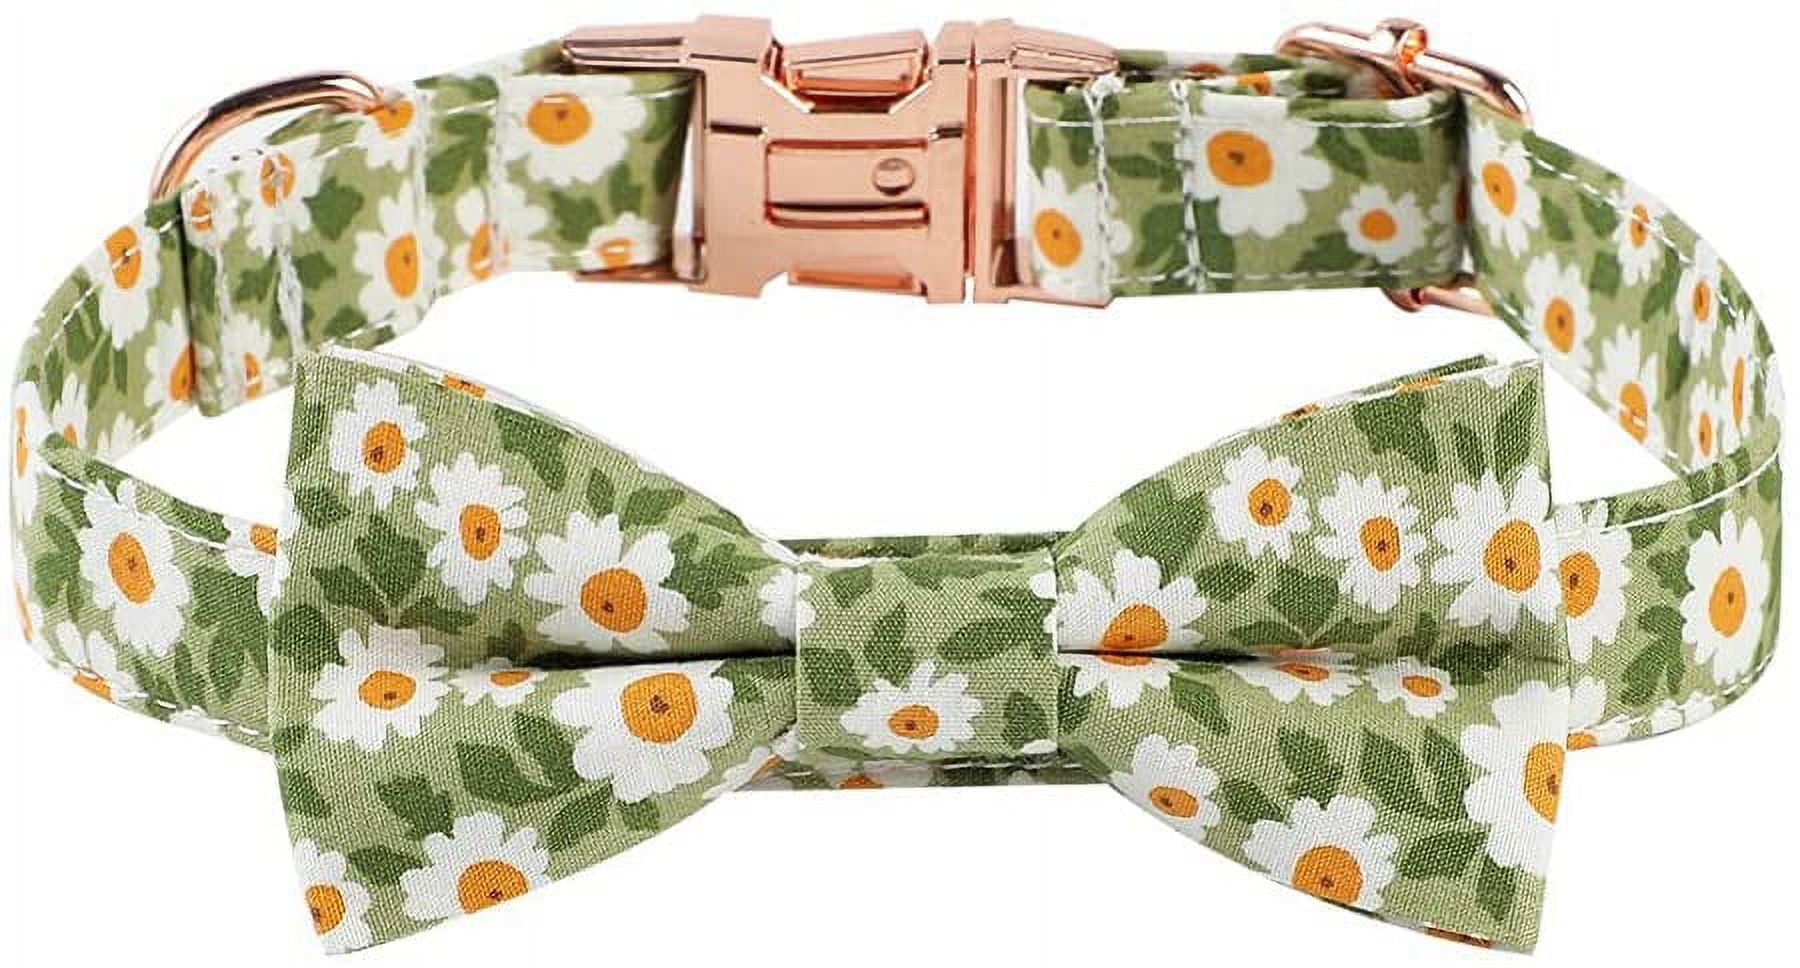 Bowtie Dog Collar Female, Bow Tie Floral Girl Dogs Collars, Adjustable Soft  For Small Medium Large Cats, Cute Daisy Patterns Comfortable Cotton Collars  With Metal Buckle, Durable Pet Puppy Gift Pink 